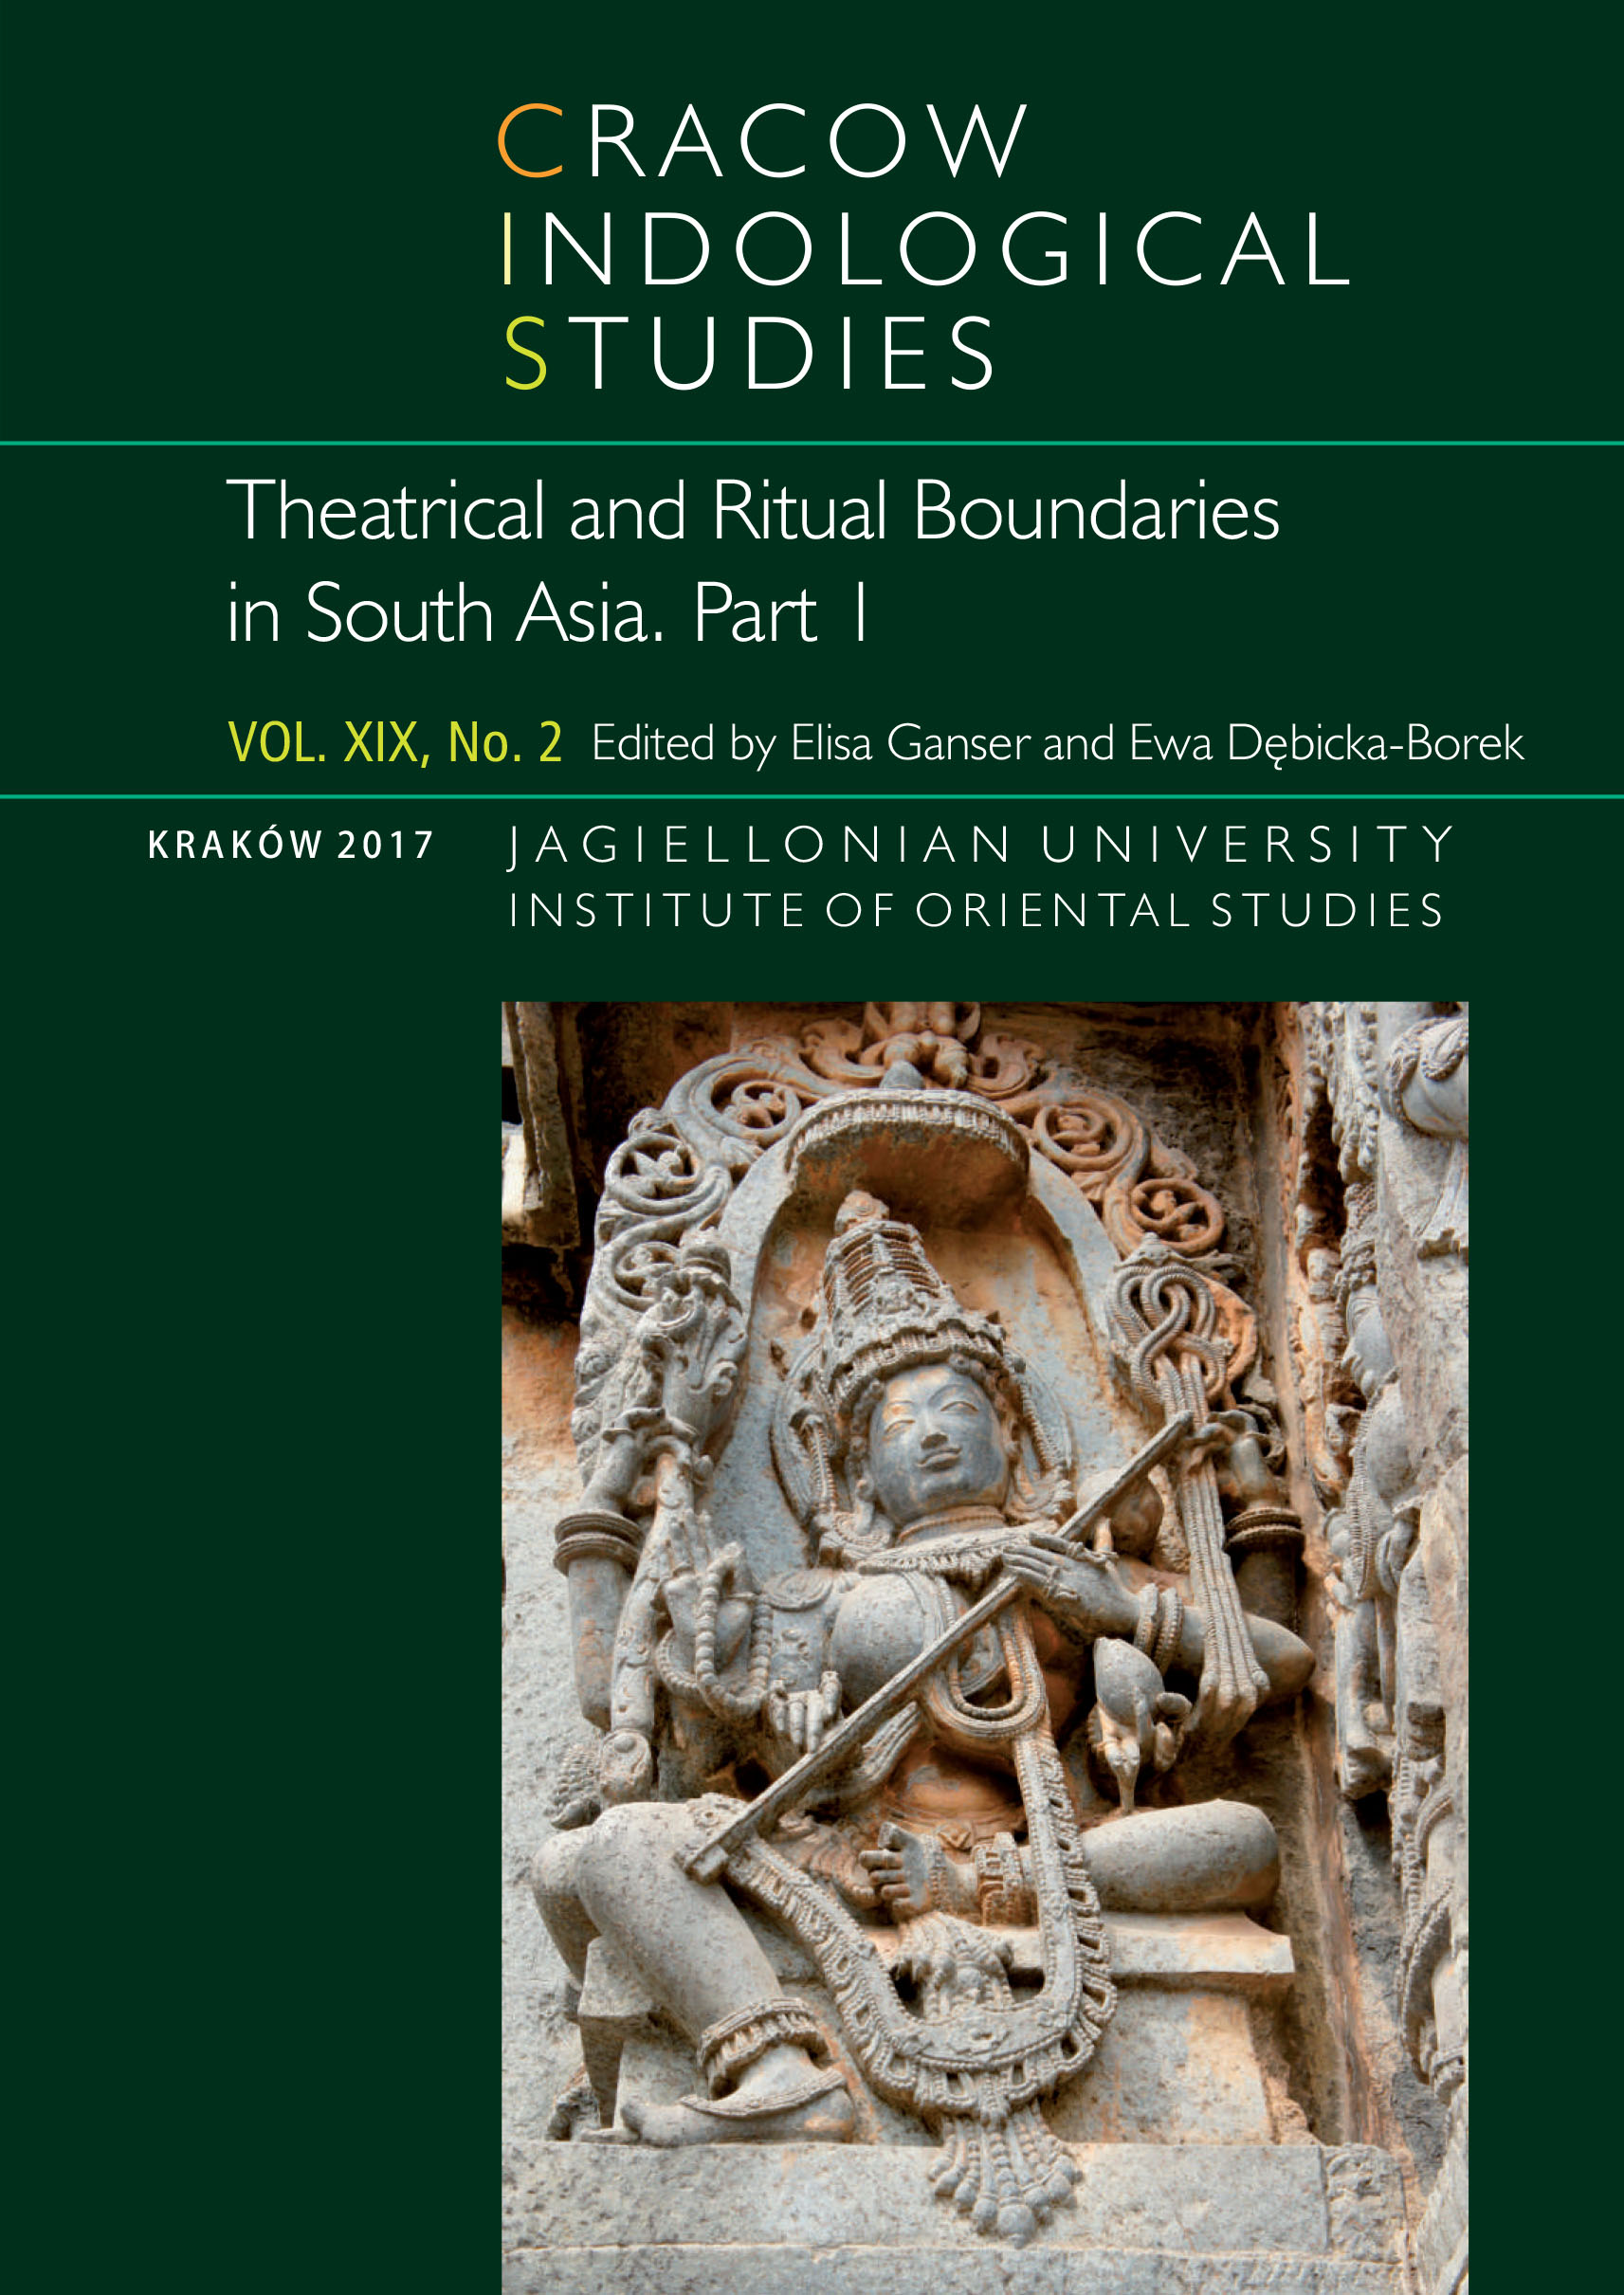 					View Vol. 19 No. 2 (2017): Theatrical and Ritual Boundaries in South Asia. Part I
				